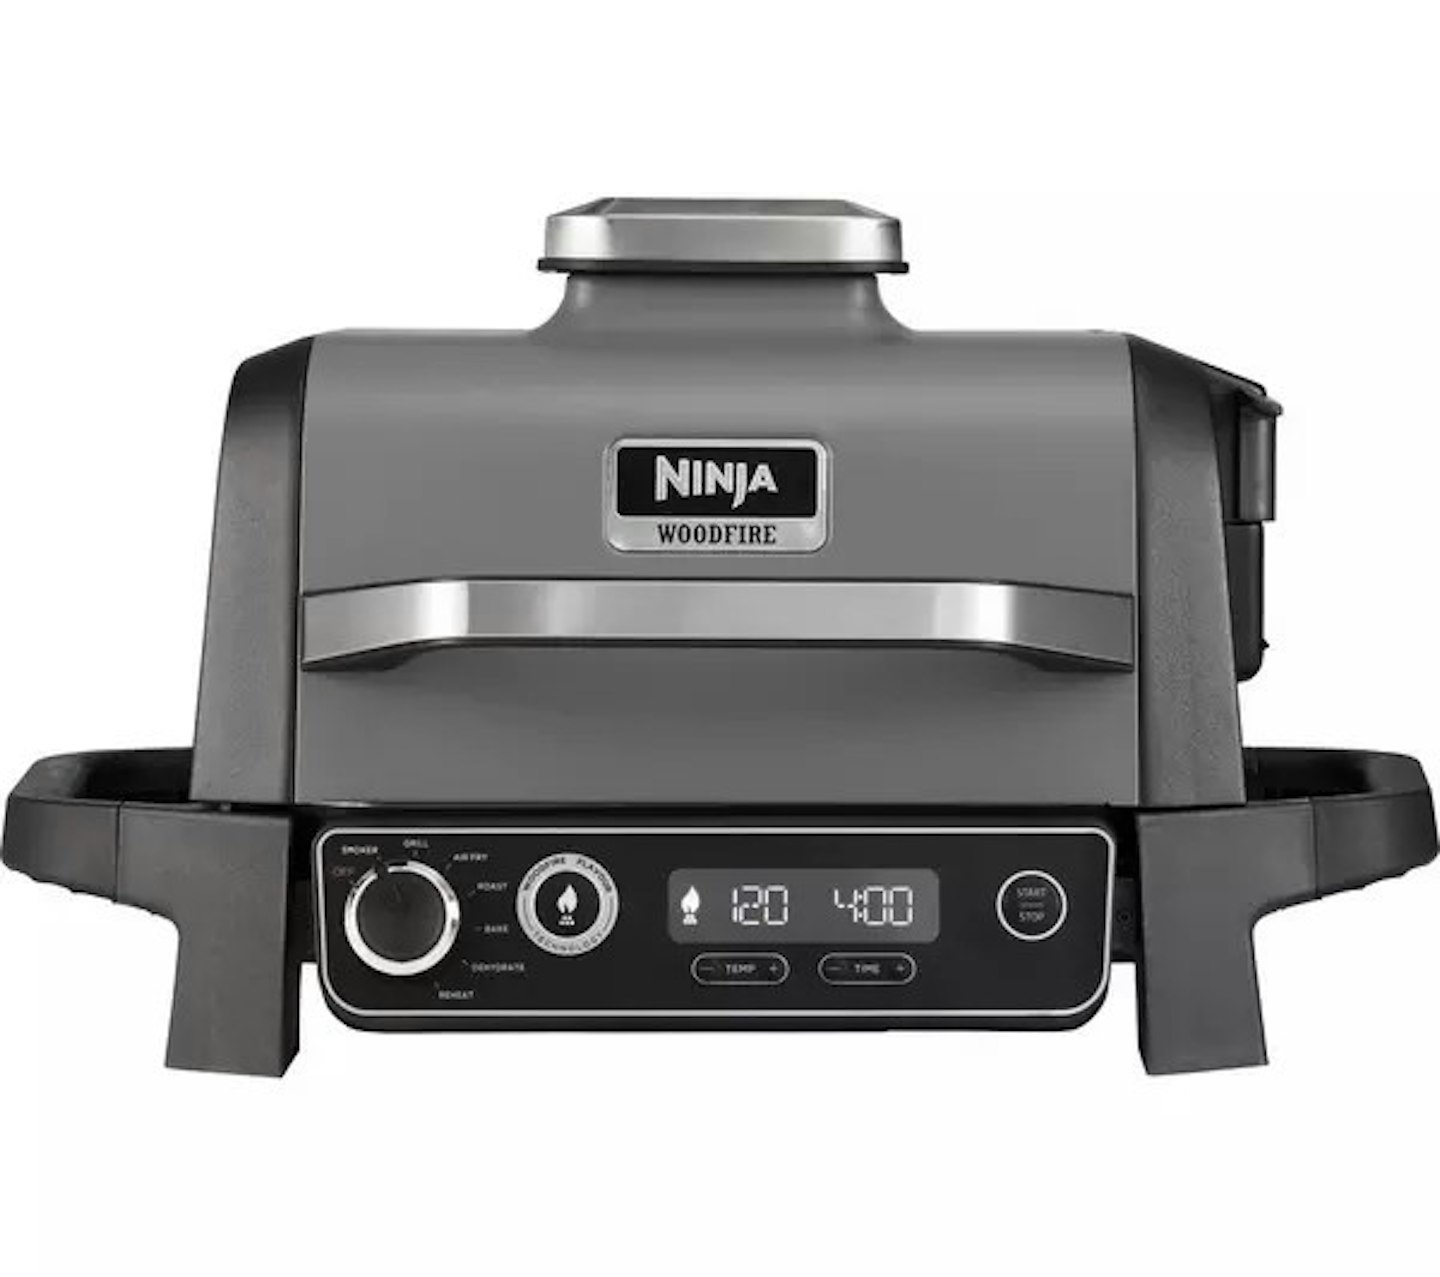 The Ninja Woodfire ProConnect XL can grill, smoke, and air fry - Reviewed